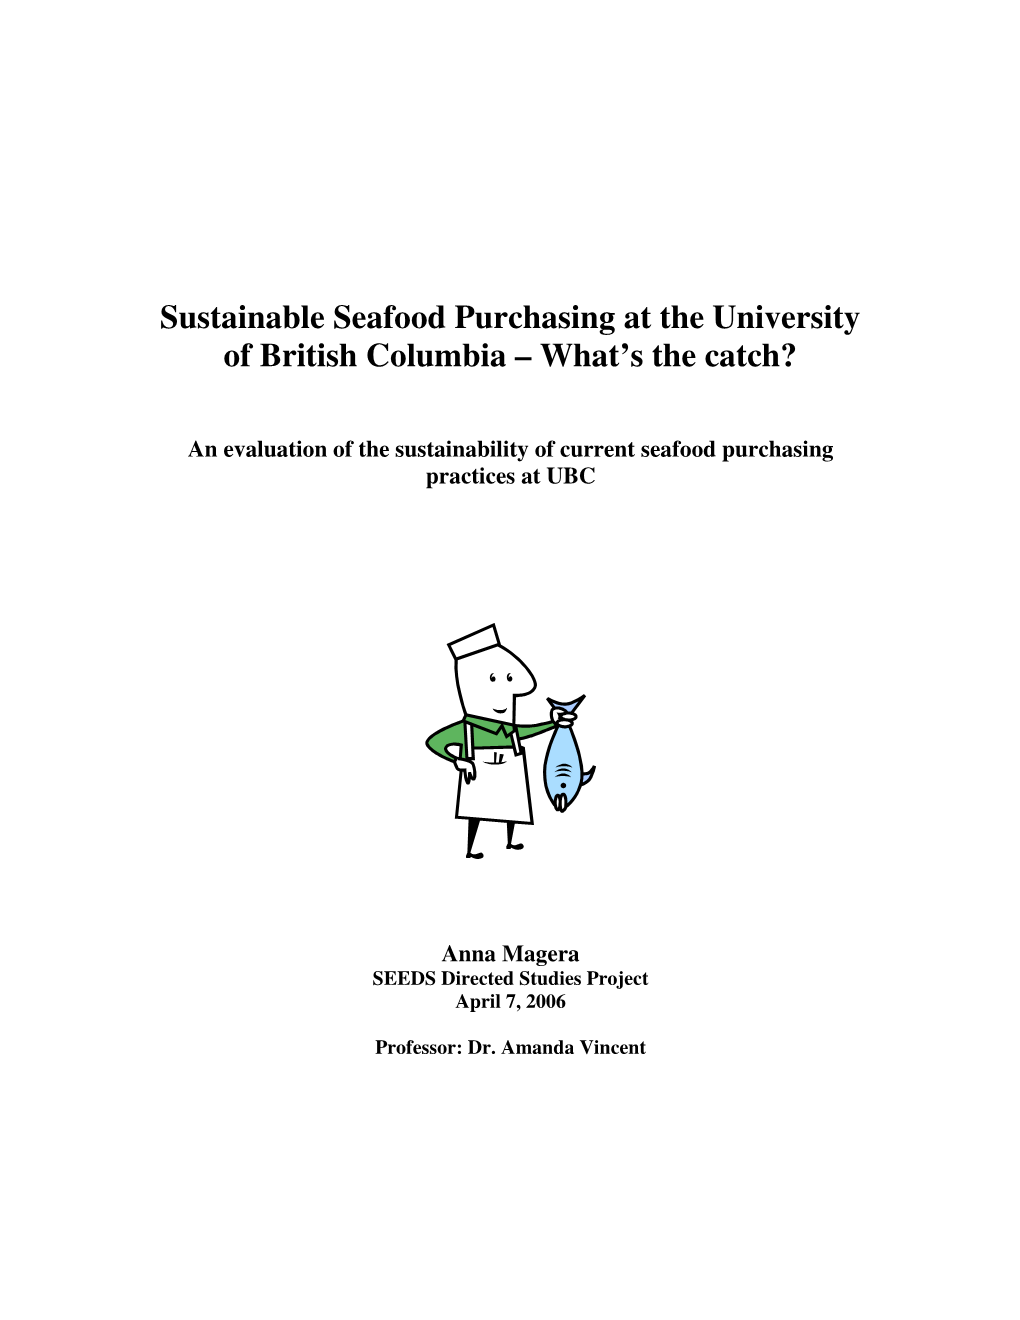 Sustainable Seafood Purchasing at the University of British Columbia – What’S the Catch?